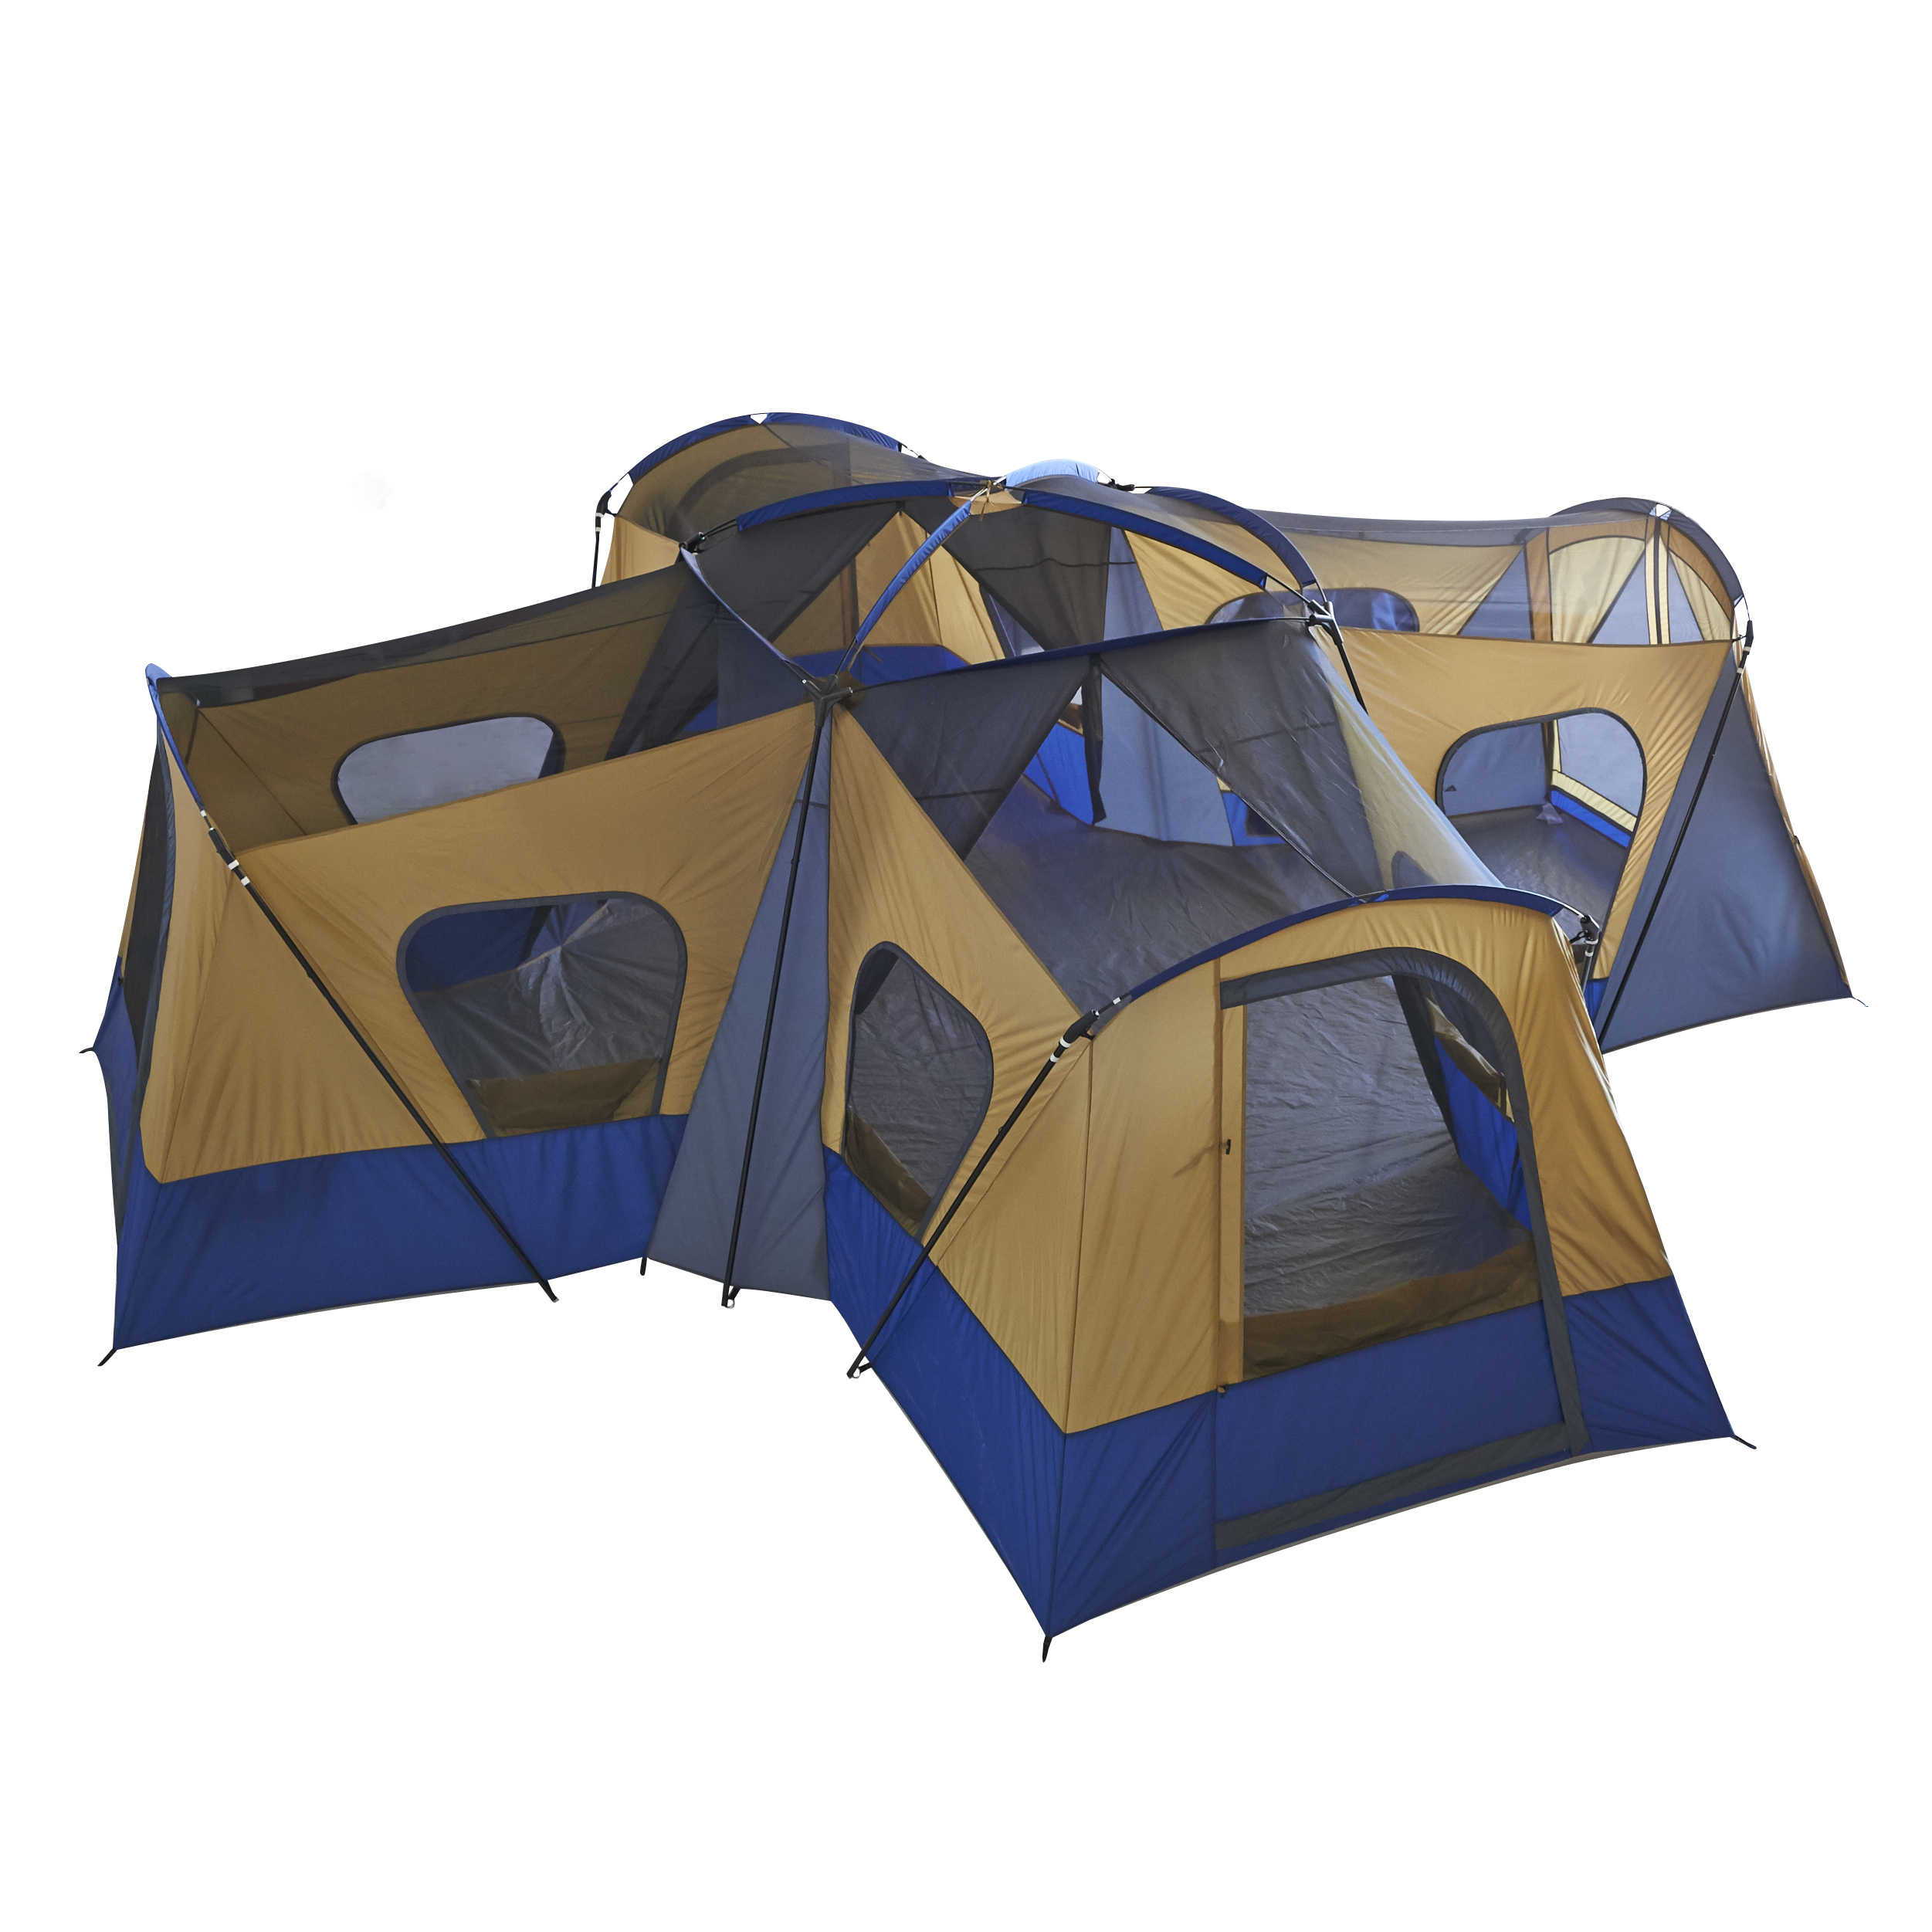 Ozark Trail 14-Person 4-Room Base Camp Tent, with 4 Separate Entrances - image 5 of 12